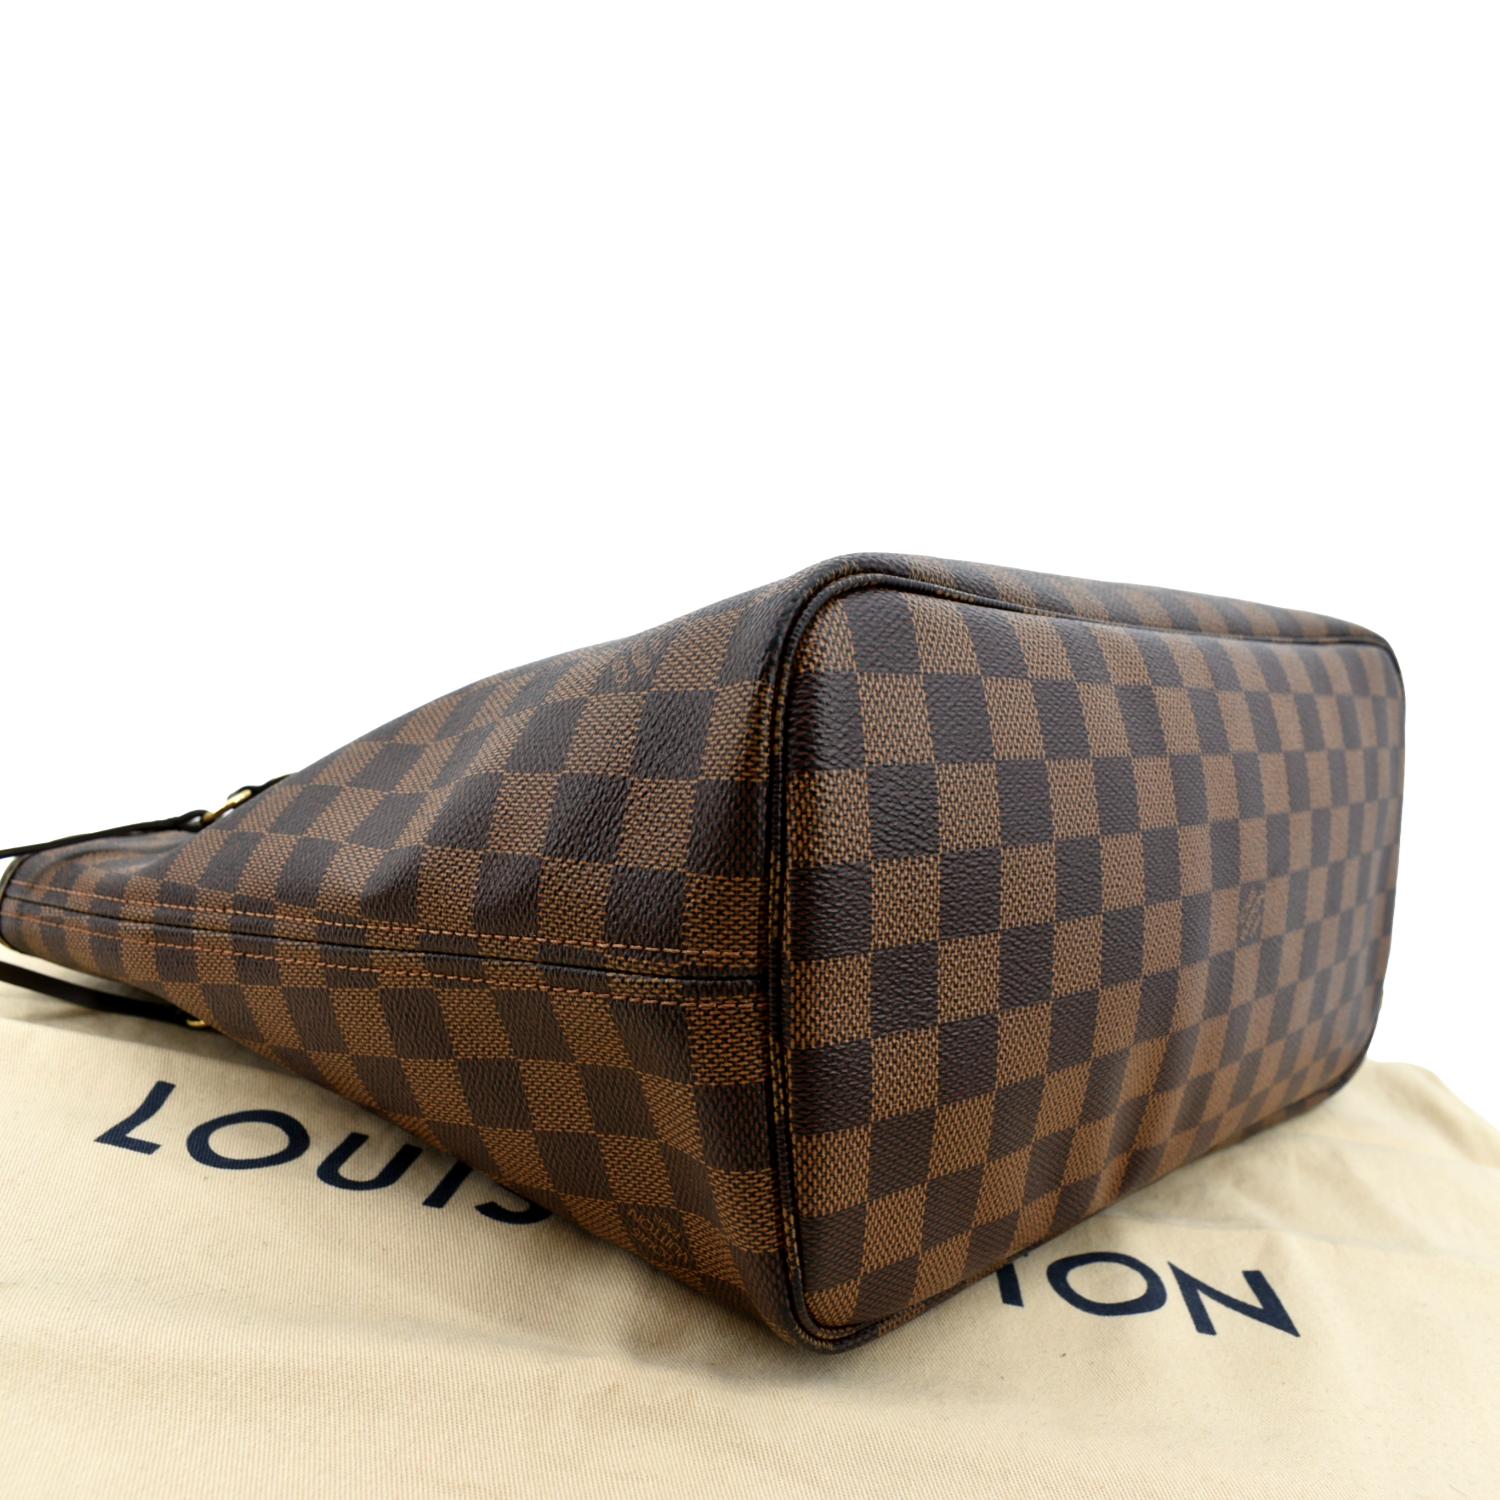 Louis Vuitton Neverfull MM Damier Ebene Canvas Tote Bags for Women